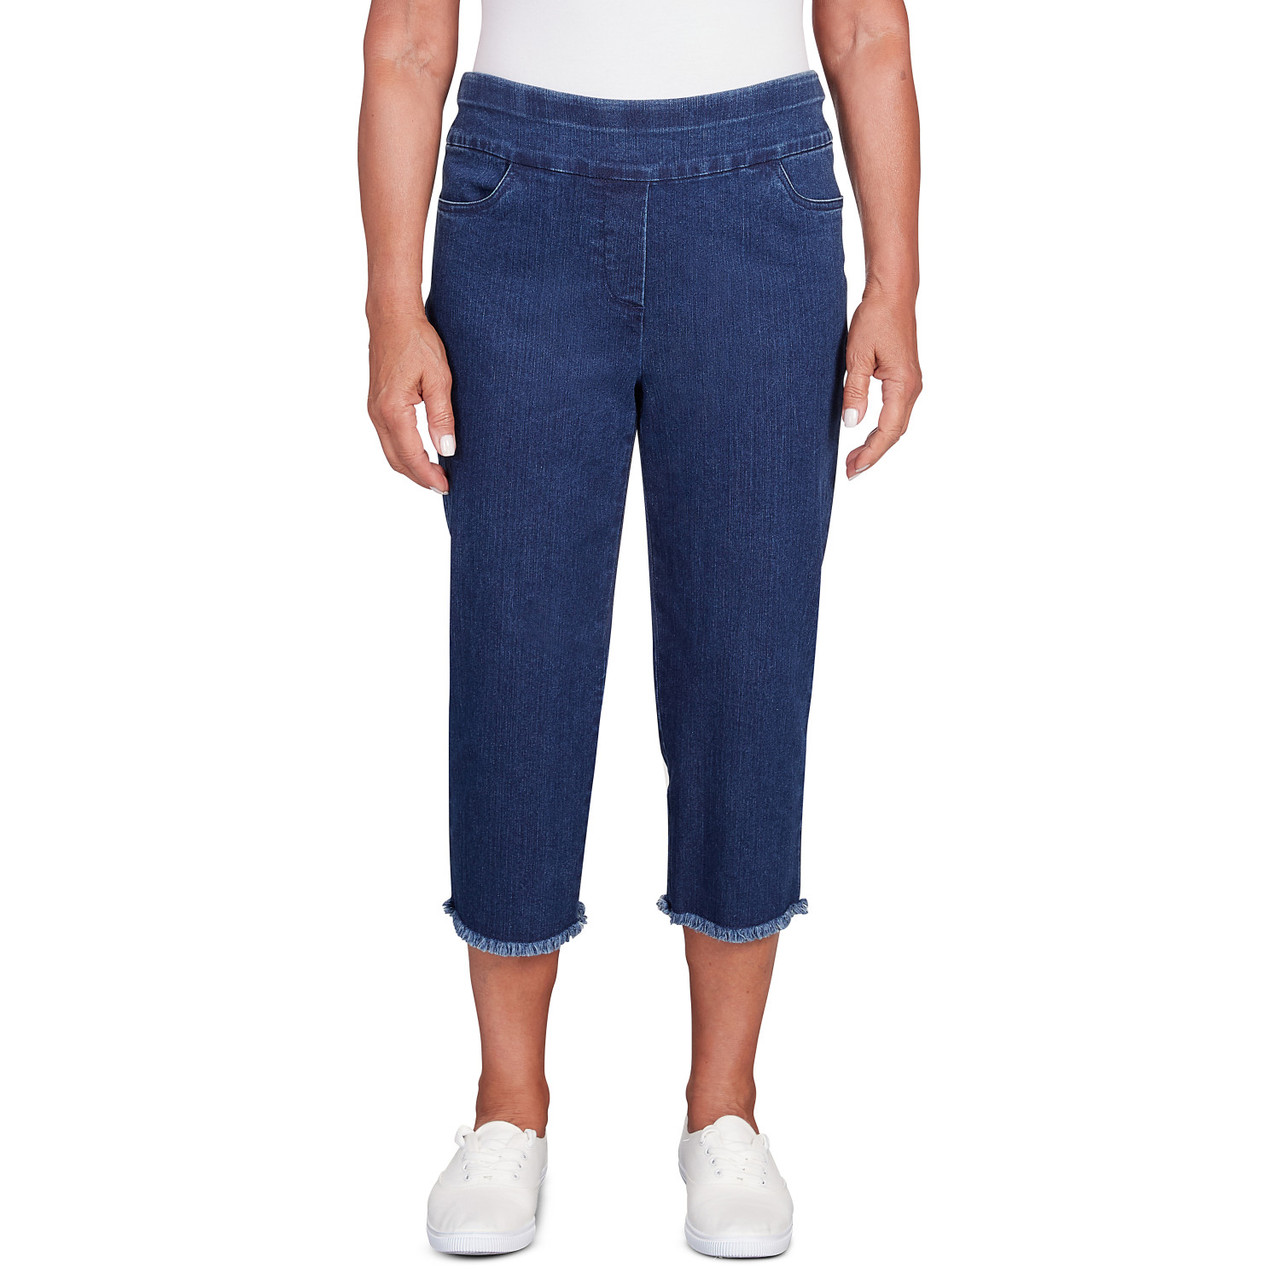 Perfect Stretch Tassel Girlfriend Capri Jeans - Chico's Off The Rack -  Chico's Outlet